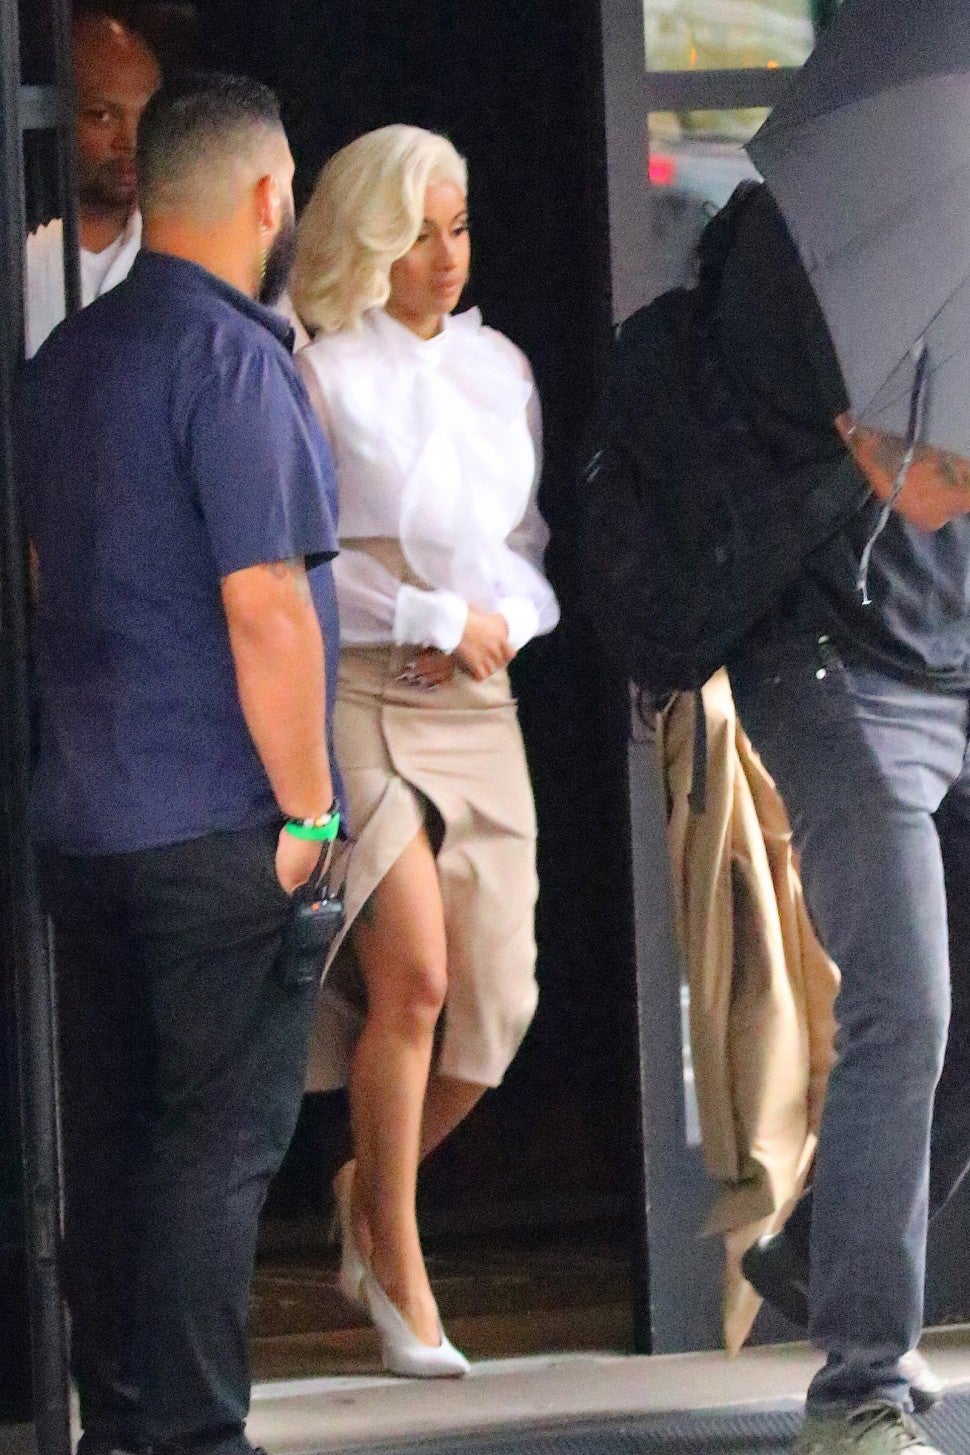 Cardi B looks stylish, in a thigh-high slit skirt and white blouse, as she leaves her hotel on her way to turn herself in to police in New York City, NY, in connection to a fight at a Queens strip club.